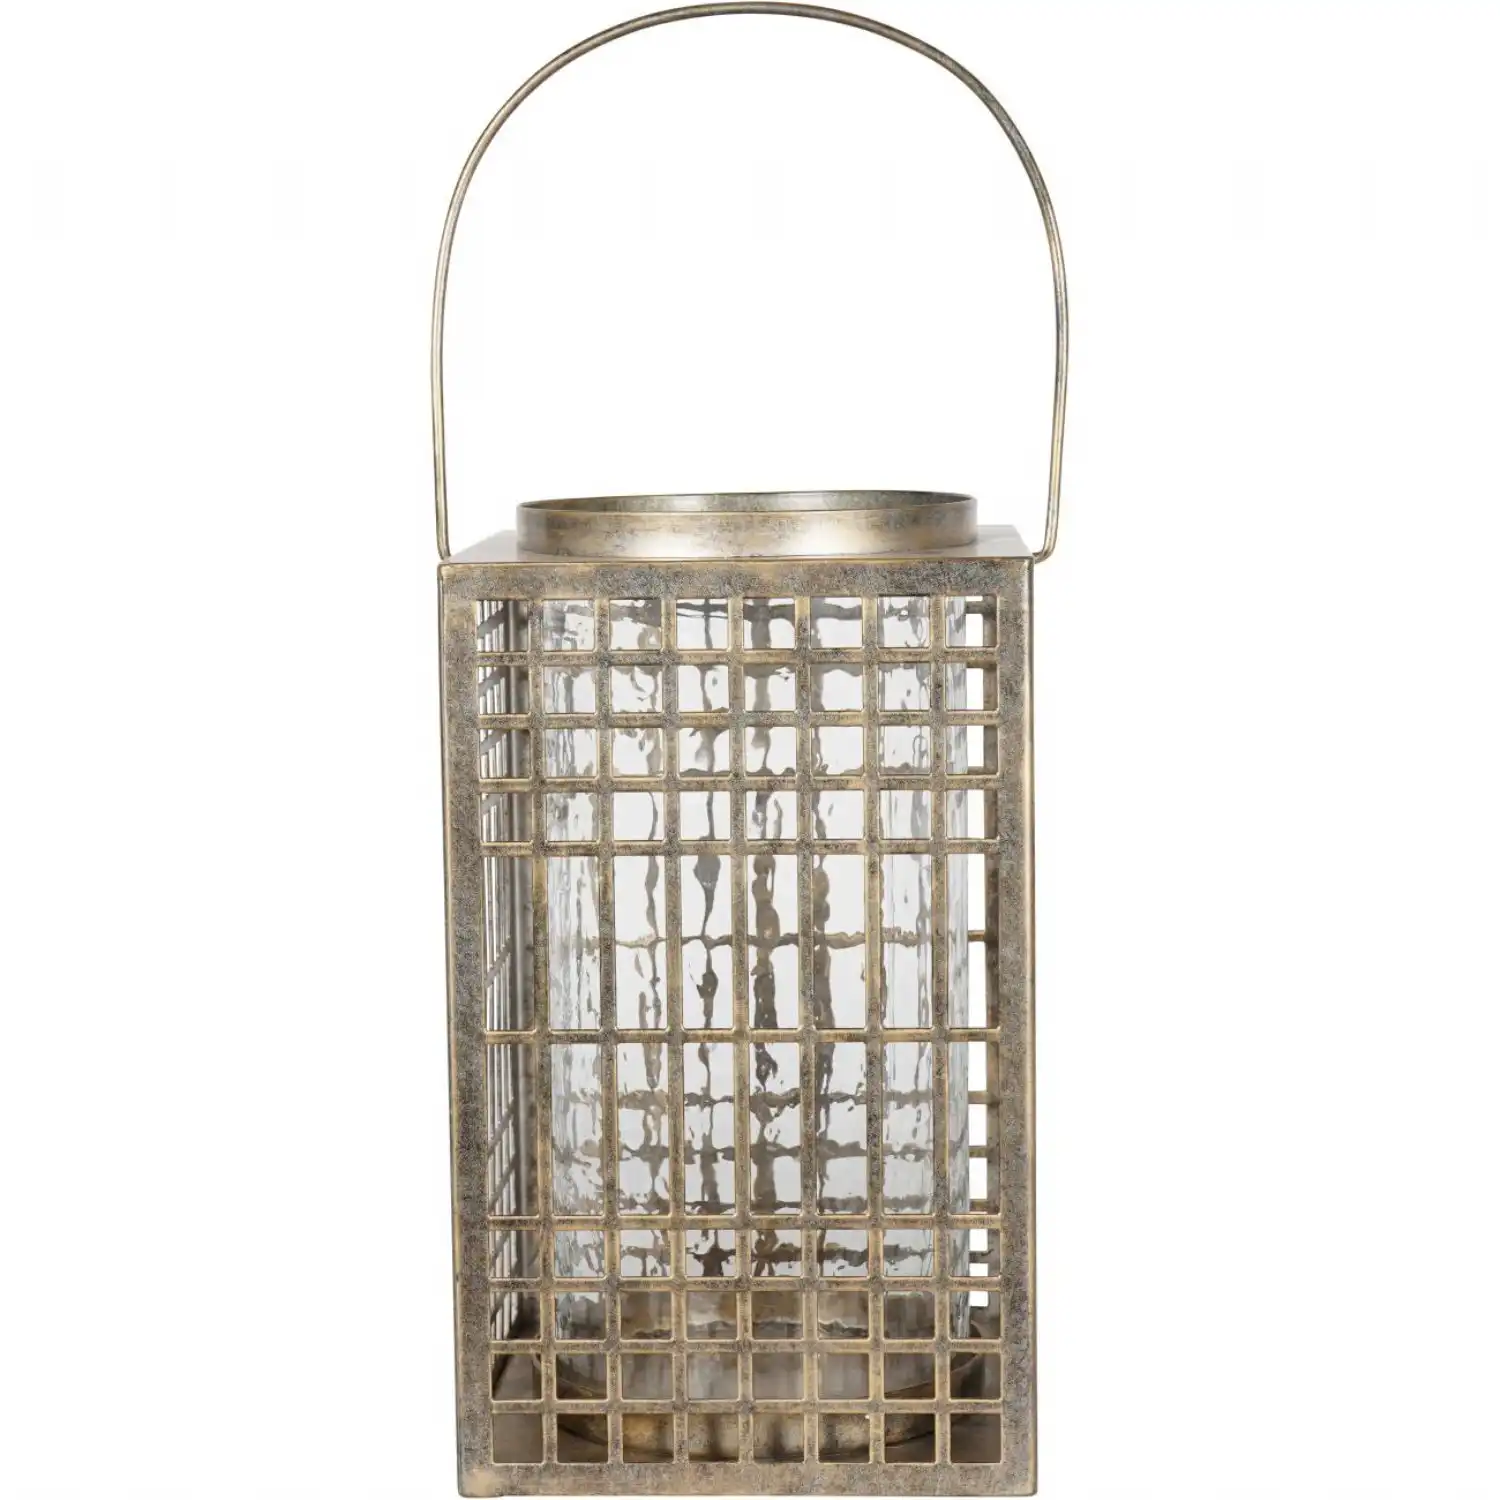 Fretwork Square Lantern in Aged Gold with Glass Flute